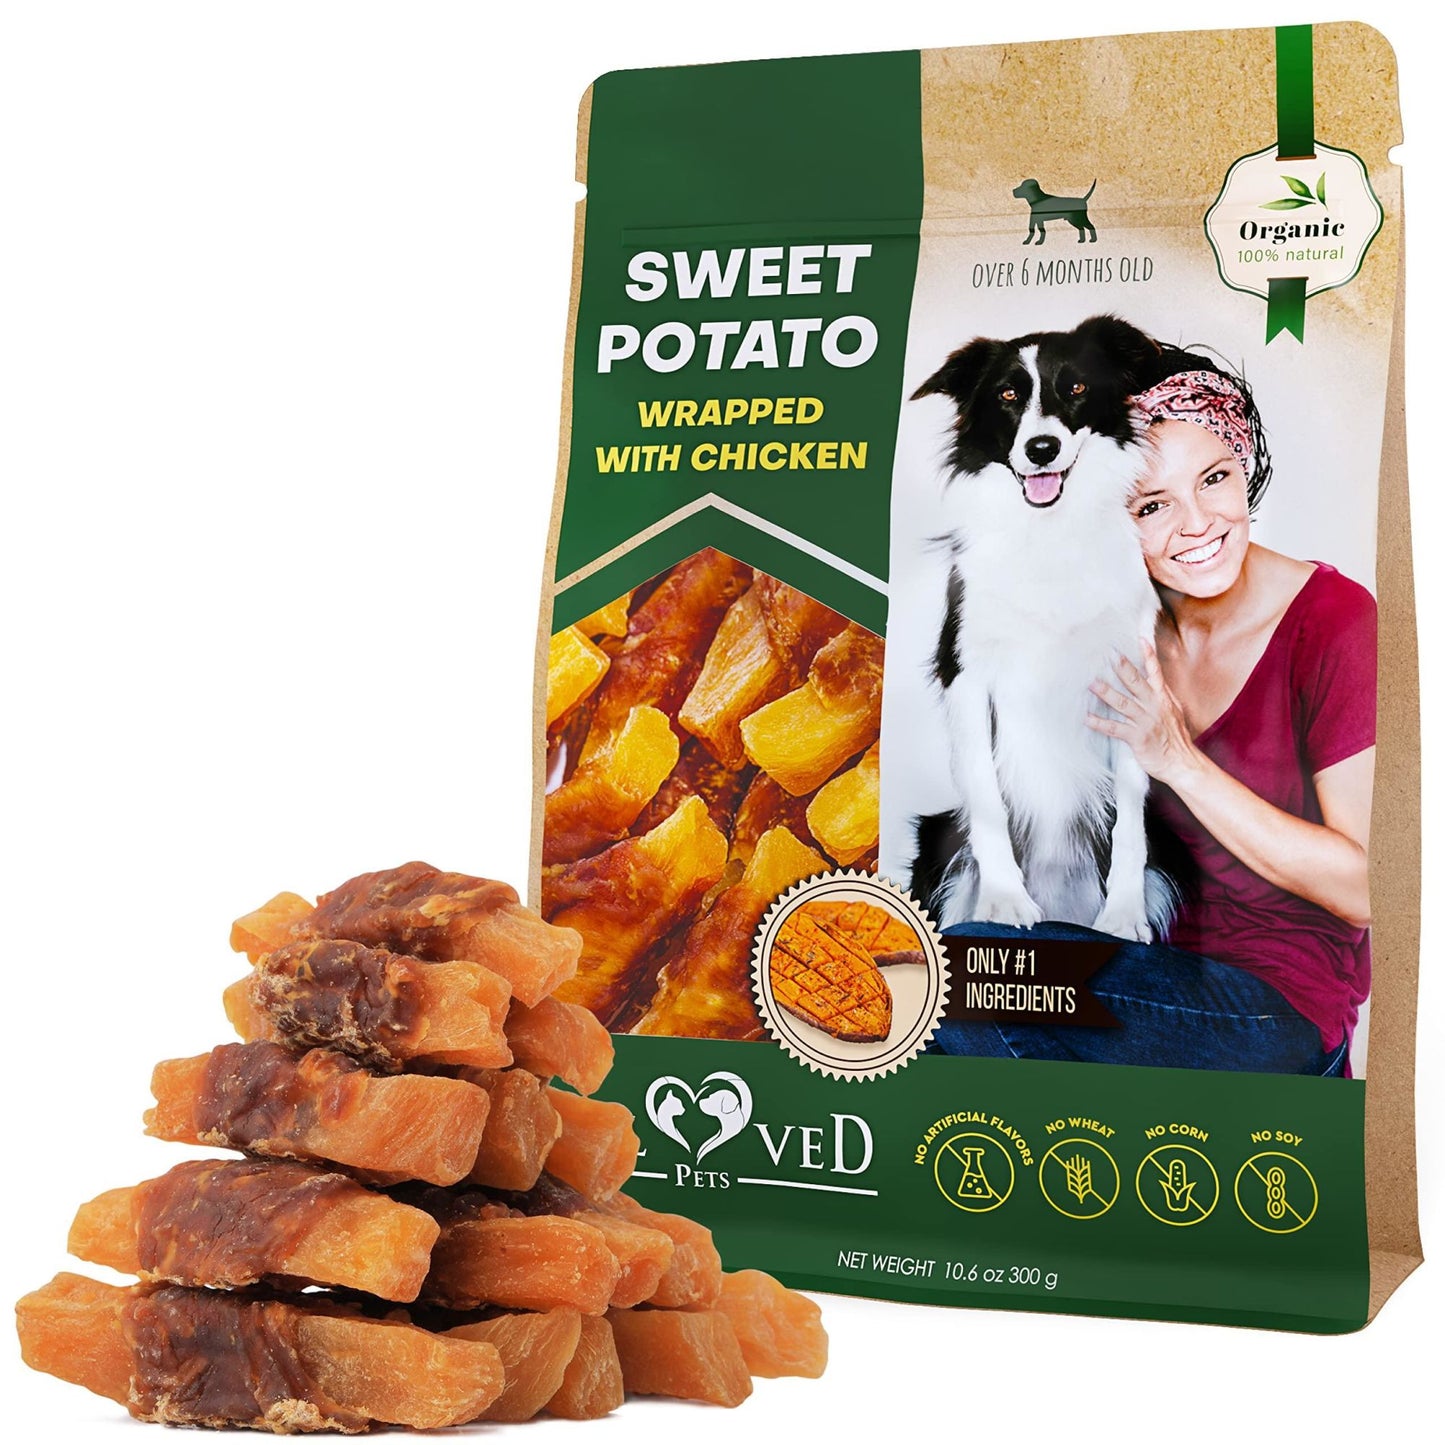 Dog Sweet Potato Wrapped with Chicken Pet Natural Chew Treats Grain Free Organic Meat Human Grade Dried Snacks in Bulk for Training for Small & Large Dogs Sweet Potato